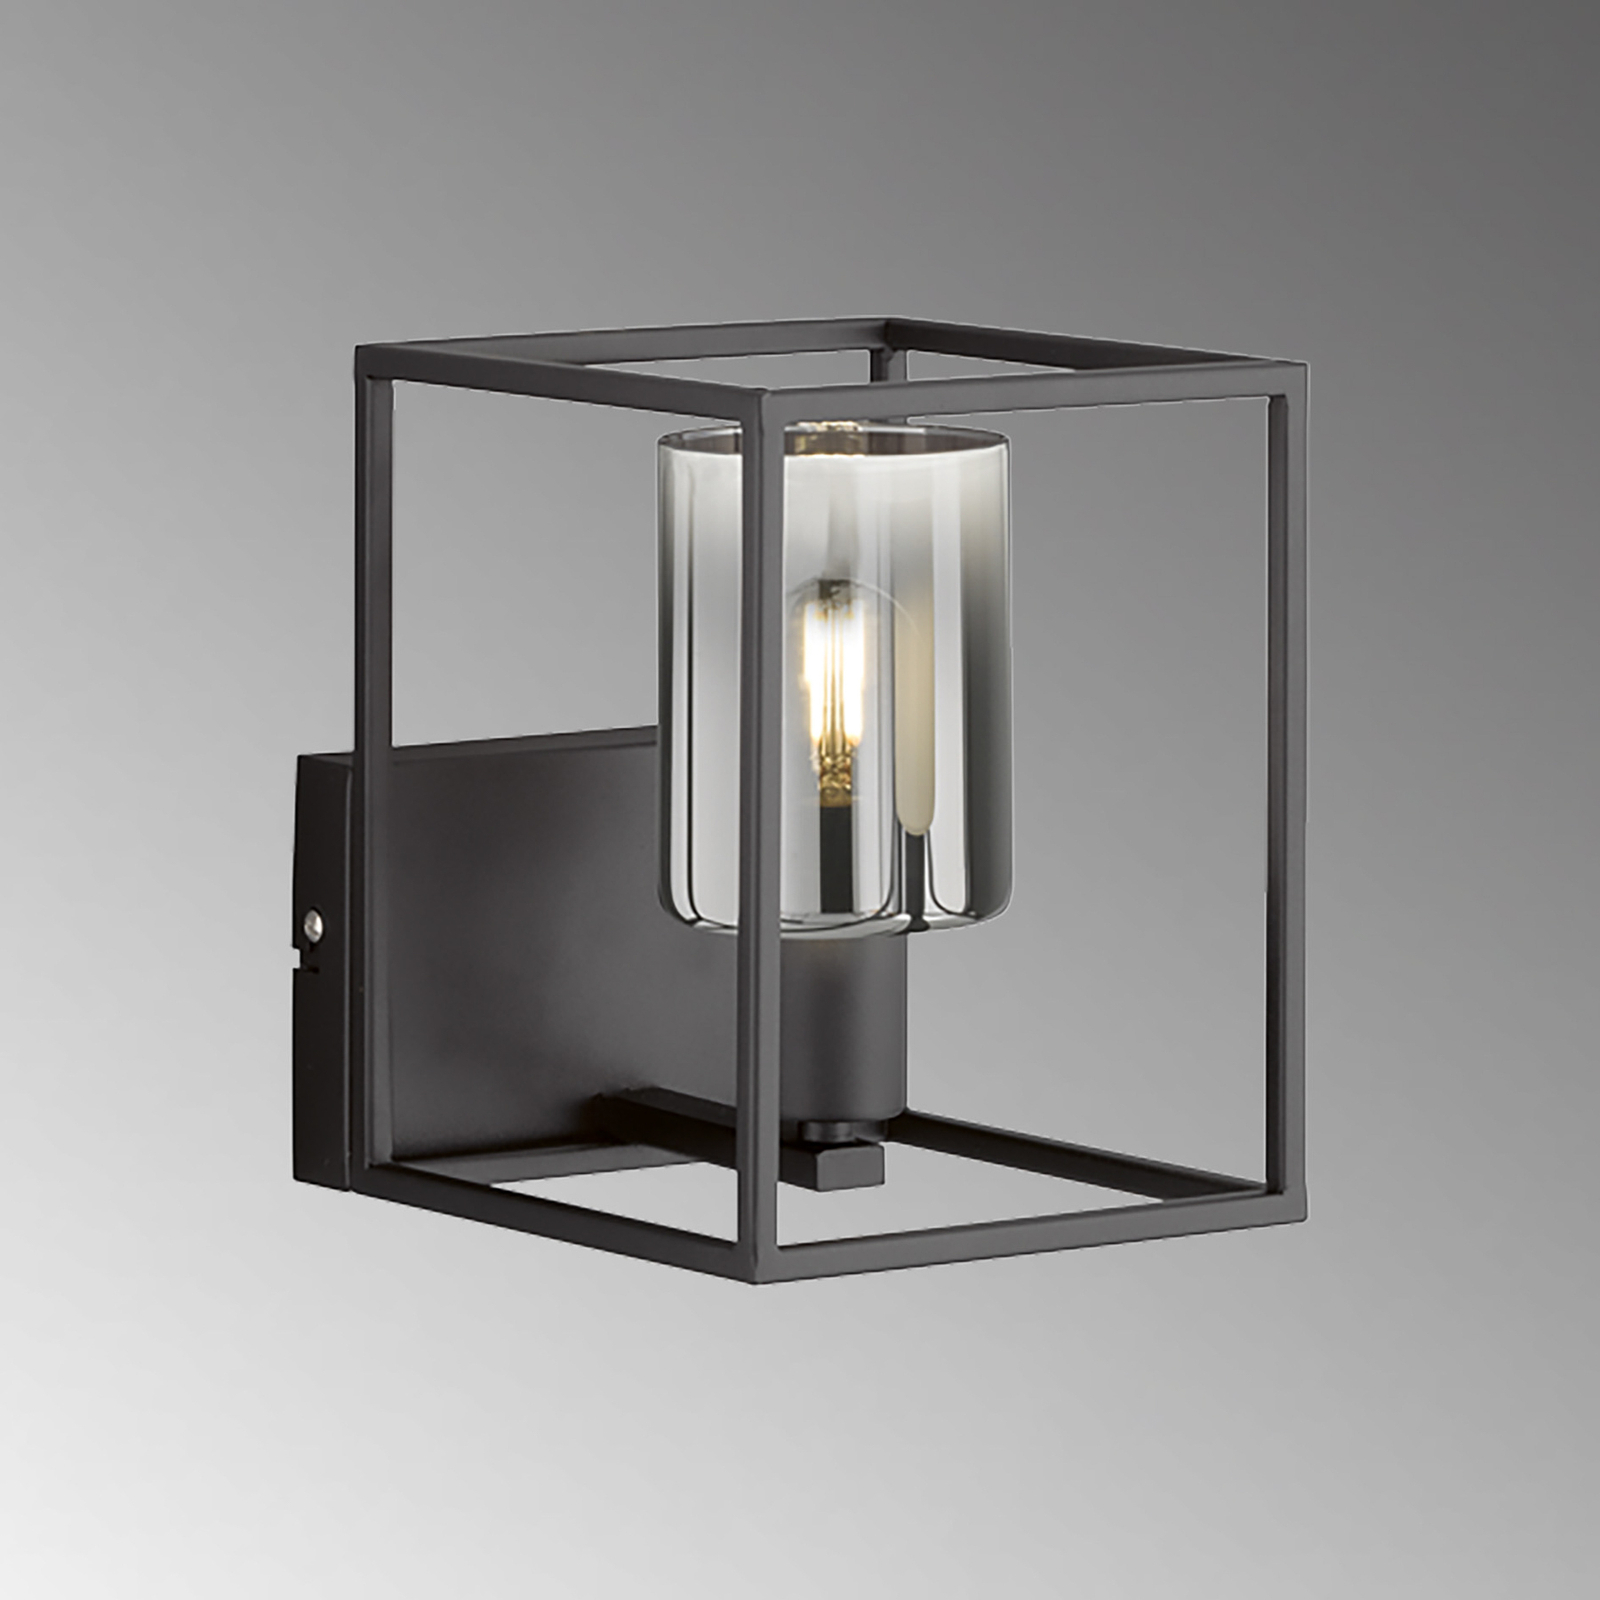 Iska wall light with a frame, glass lampshade